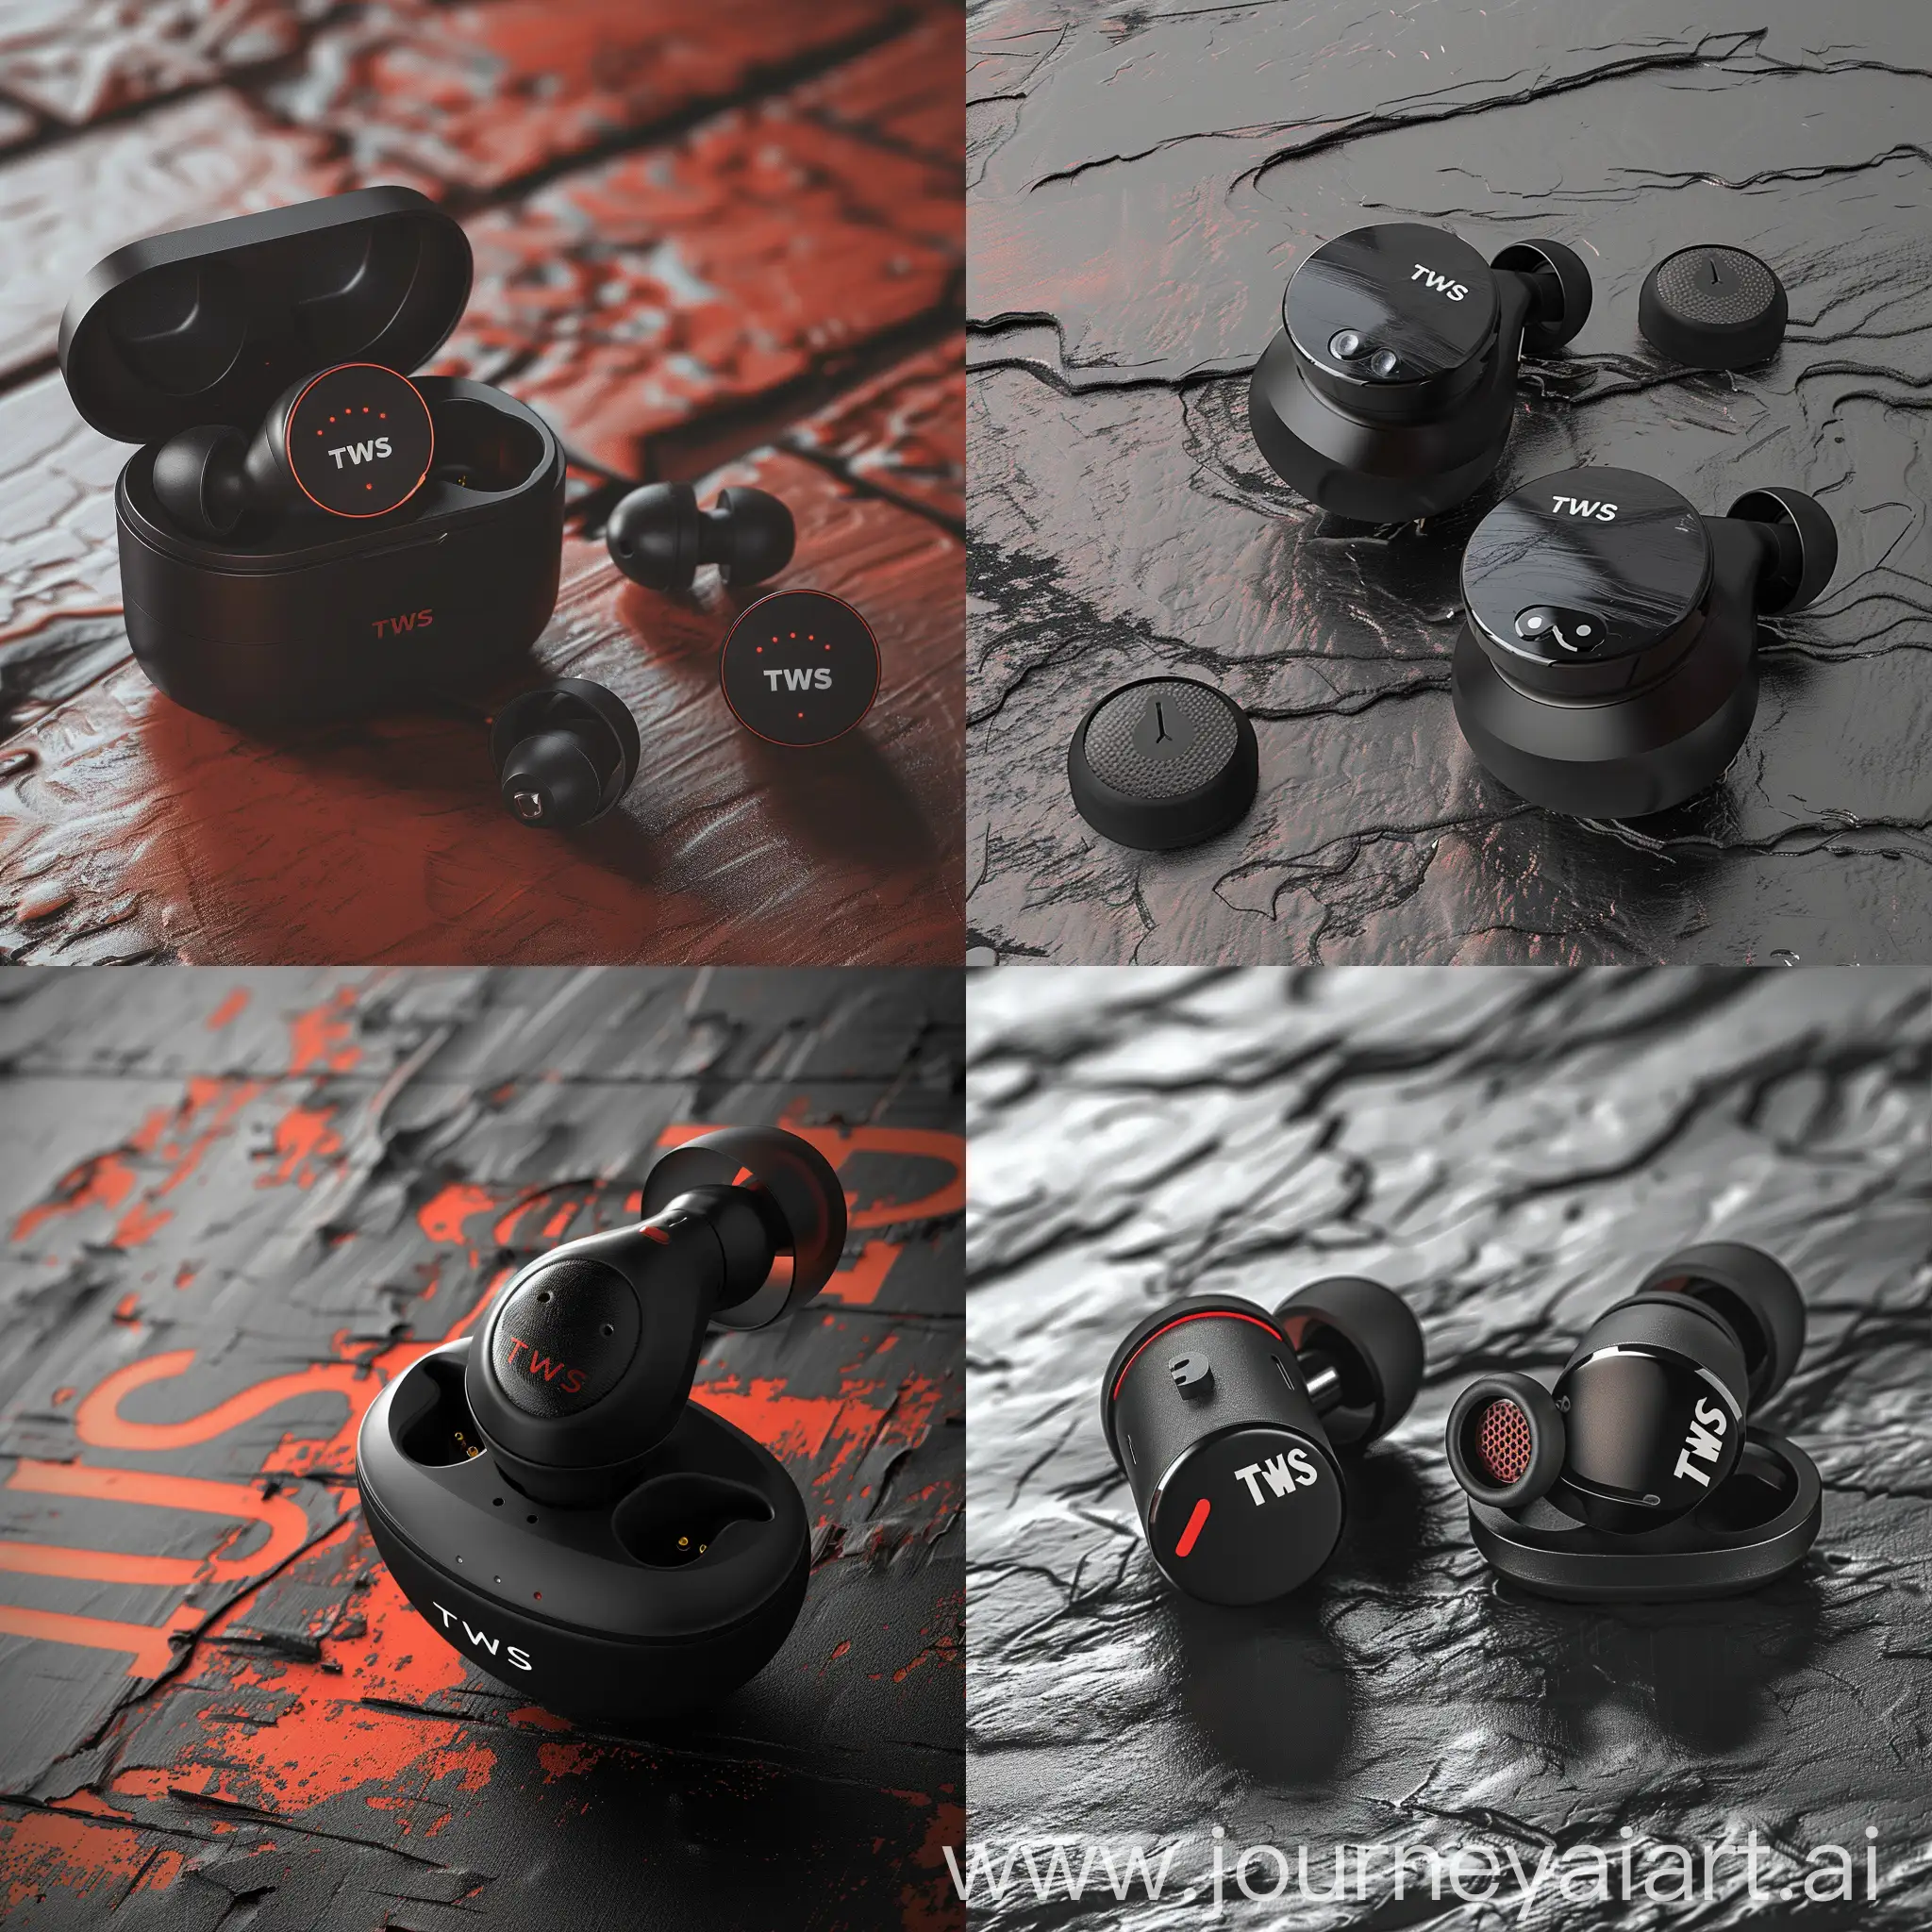 Stylish-TWS-Earphones-with-Textured-Background-Cool-Wireless-Earbuds